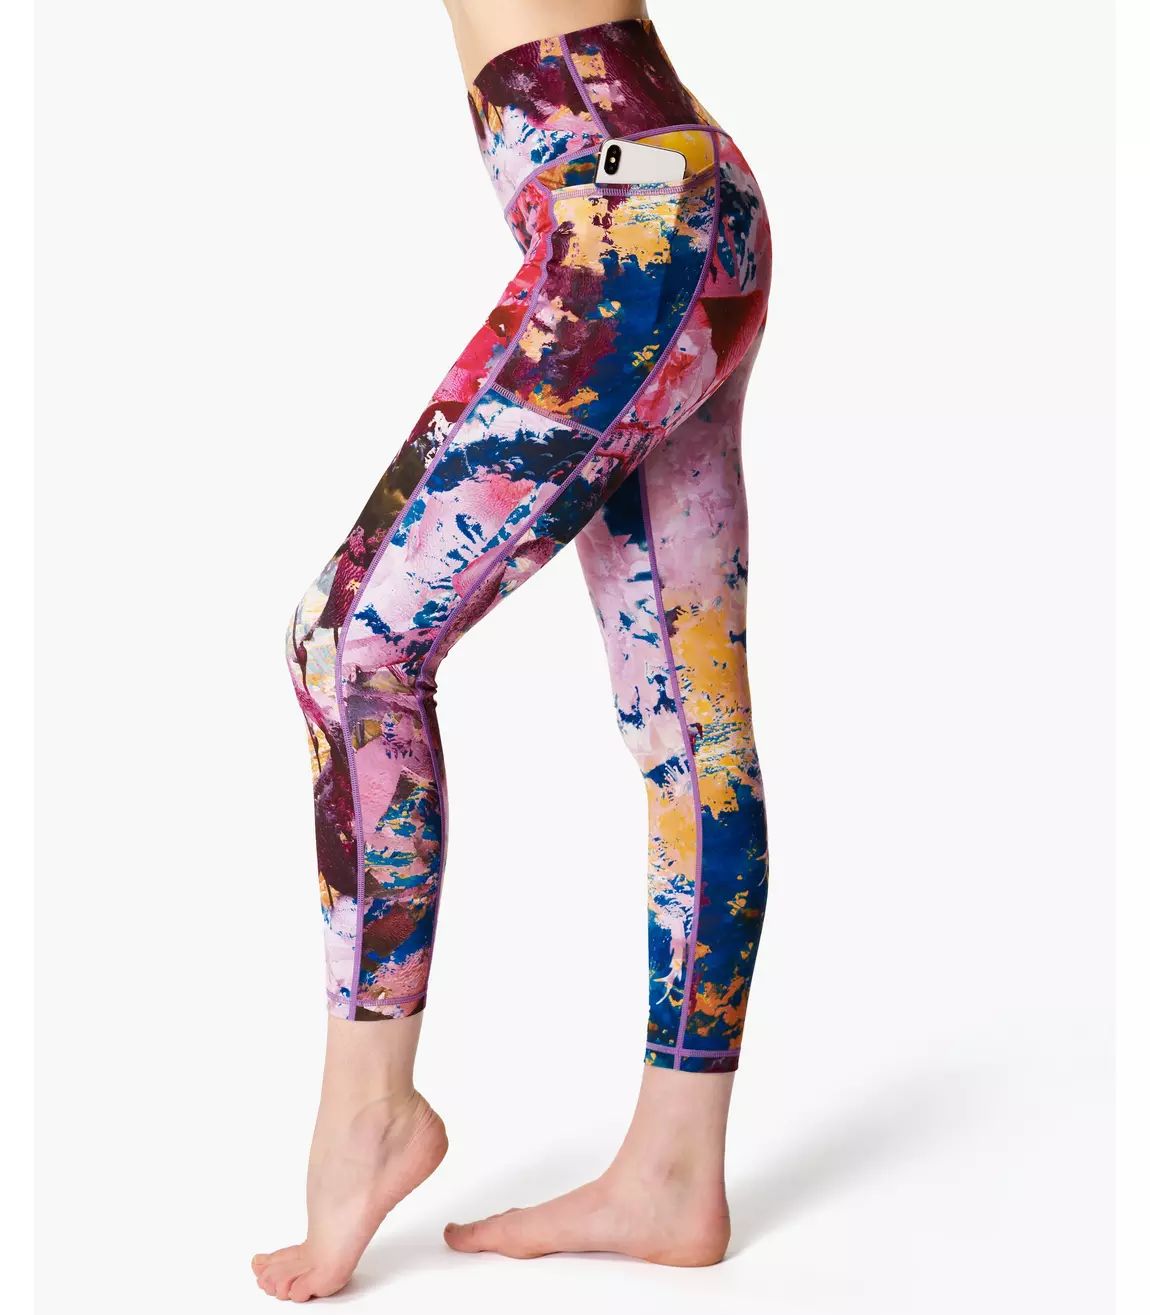 Super Sculpt Sustainable High-Waisted 7/8 Yoga Leggings | Sweaty Betty (US)